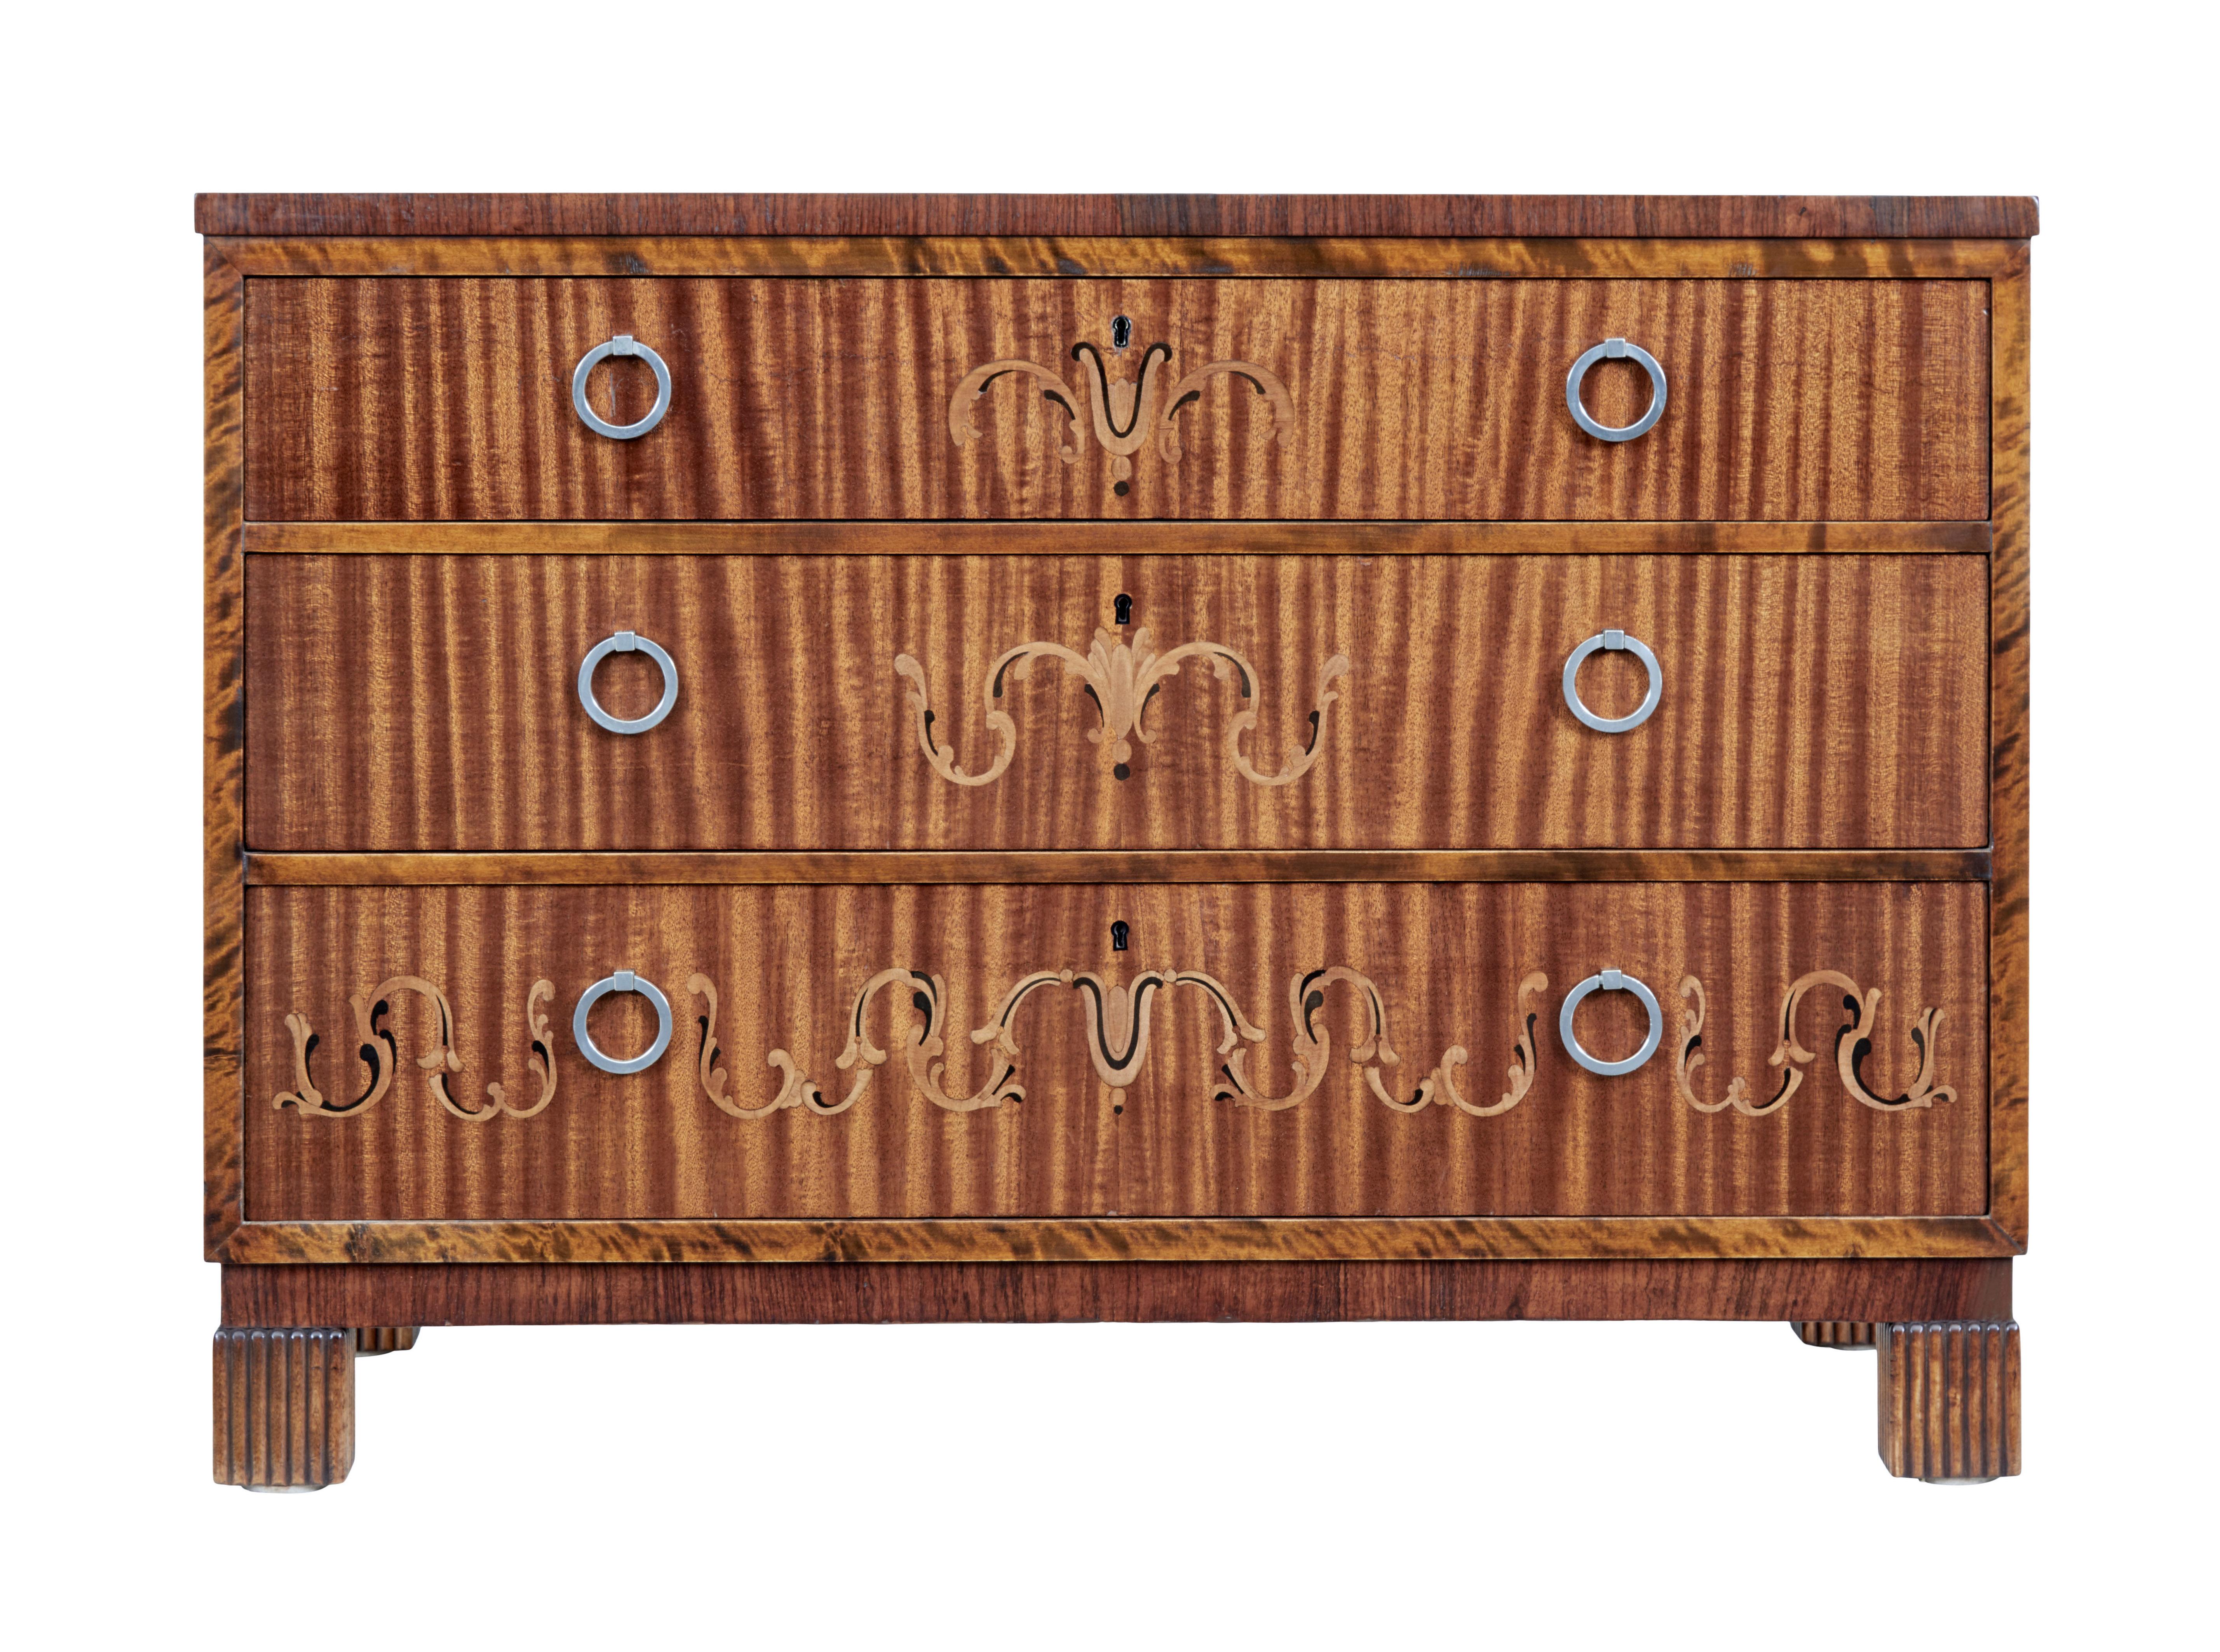 Swedish art deco chest of drawers, circa 1930.

Dark stained birch outer frame. 3 graduating mahogany drawer fronts inlaid with birch and ebonized swags, fitted with brush steel ring handles.

Standing on fluted block feet.

Minor surface